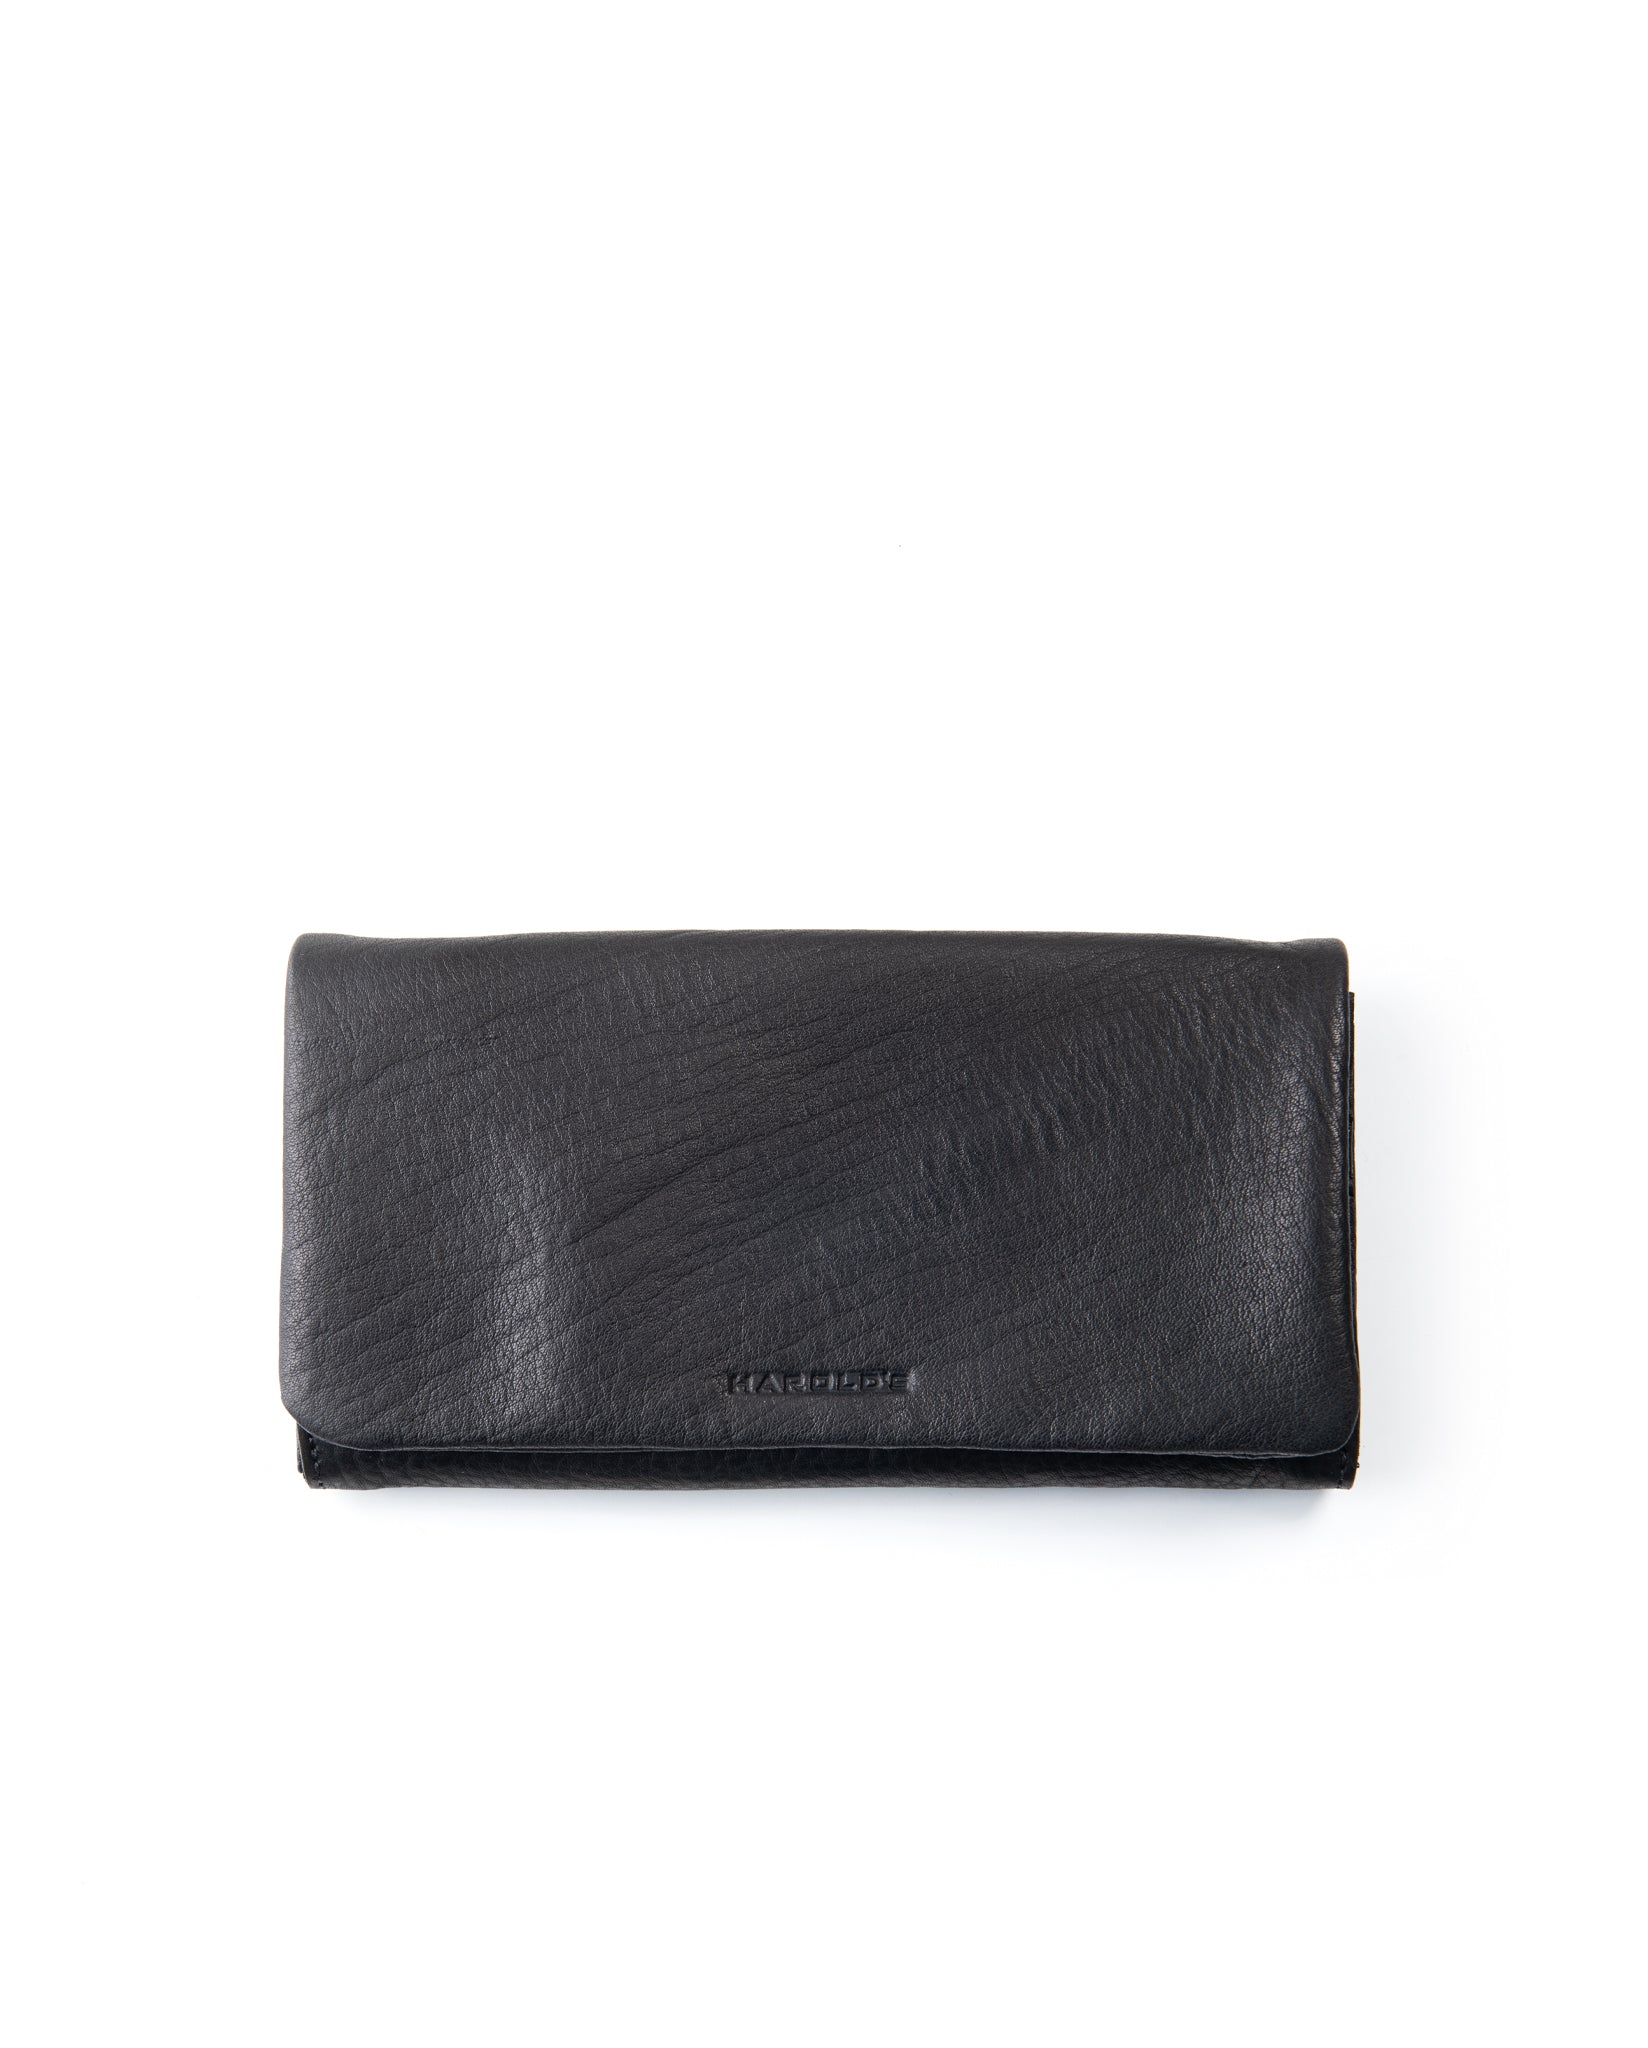 Chacoral Soft wallet flap large